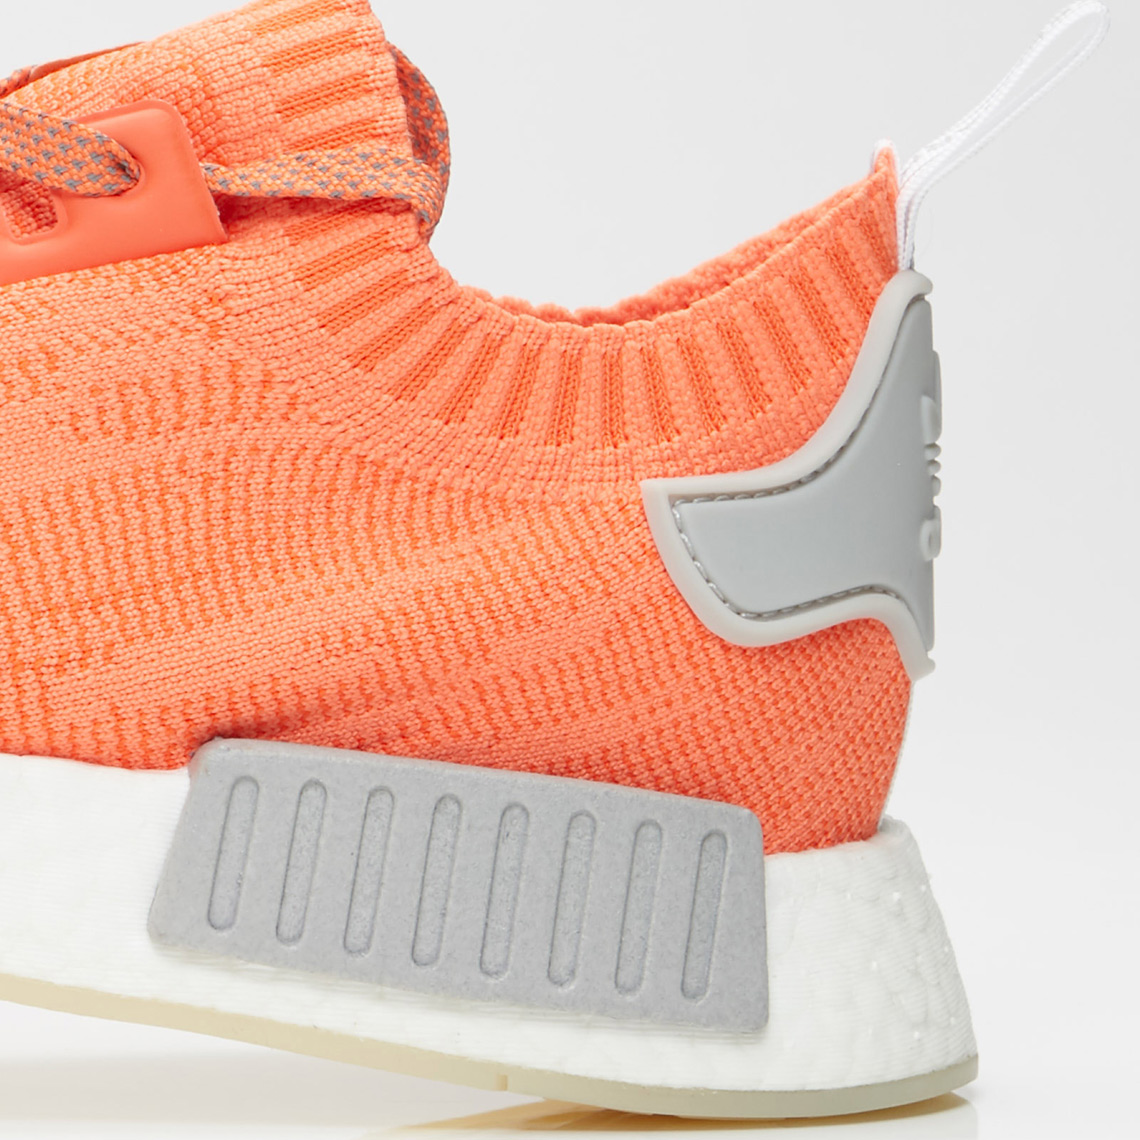 Adidas Nmd R1 Pk Release Info 2